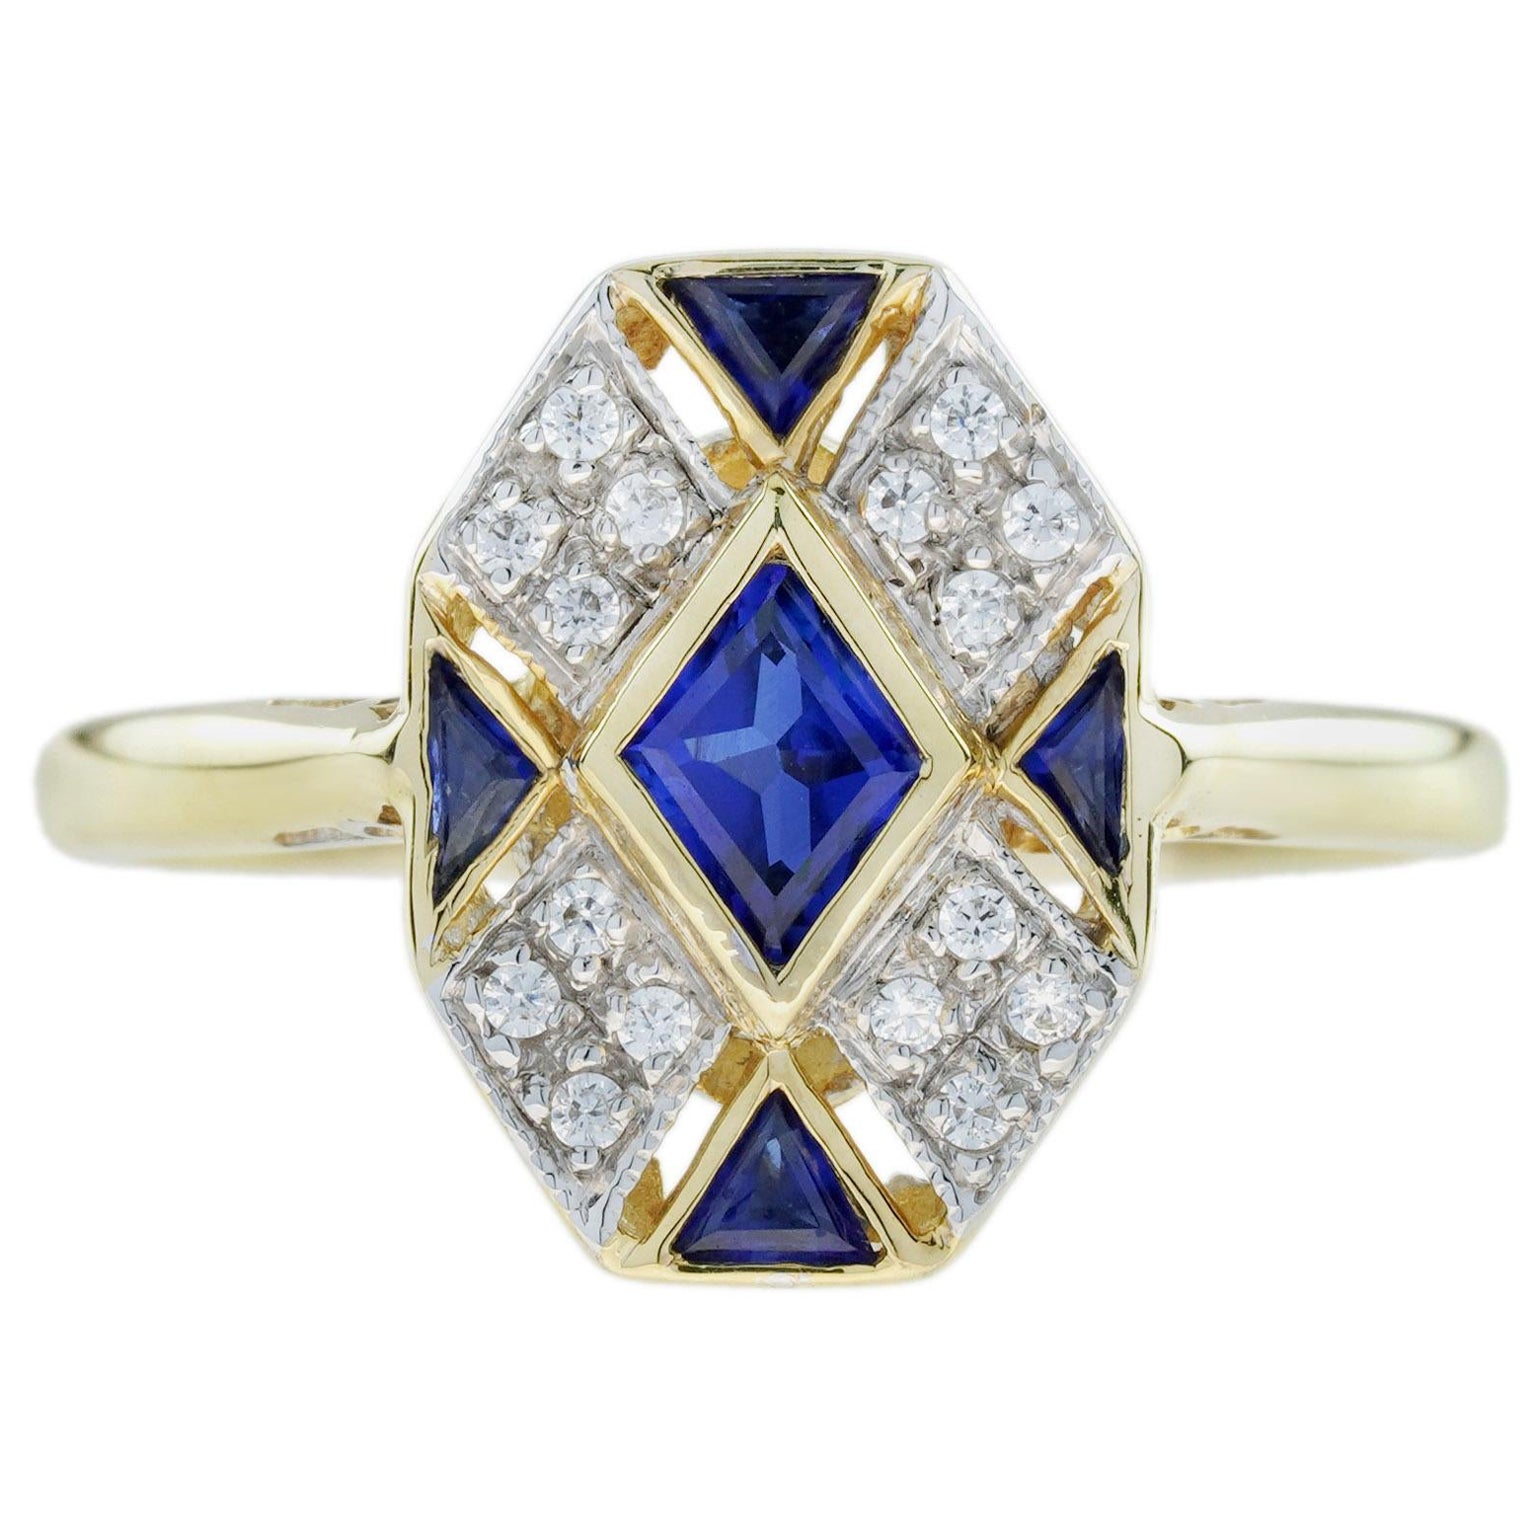 For Sale:  Blue Sapphire and Diamond Art Deco Style Cluster Ring in 14K Two Tone Gold